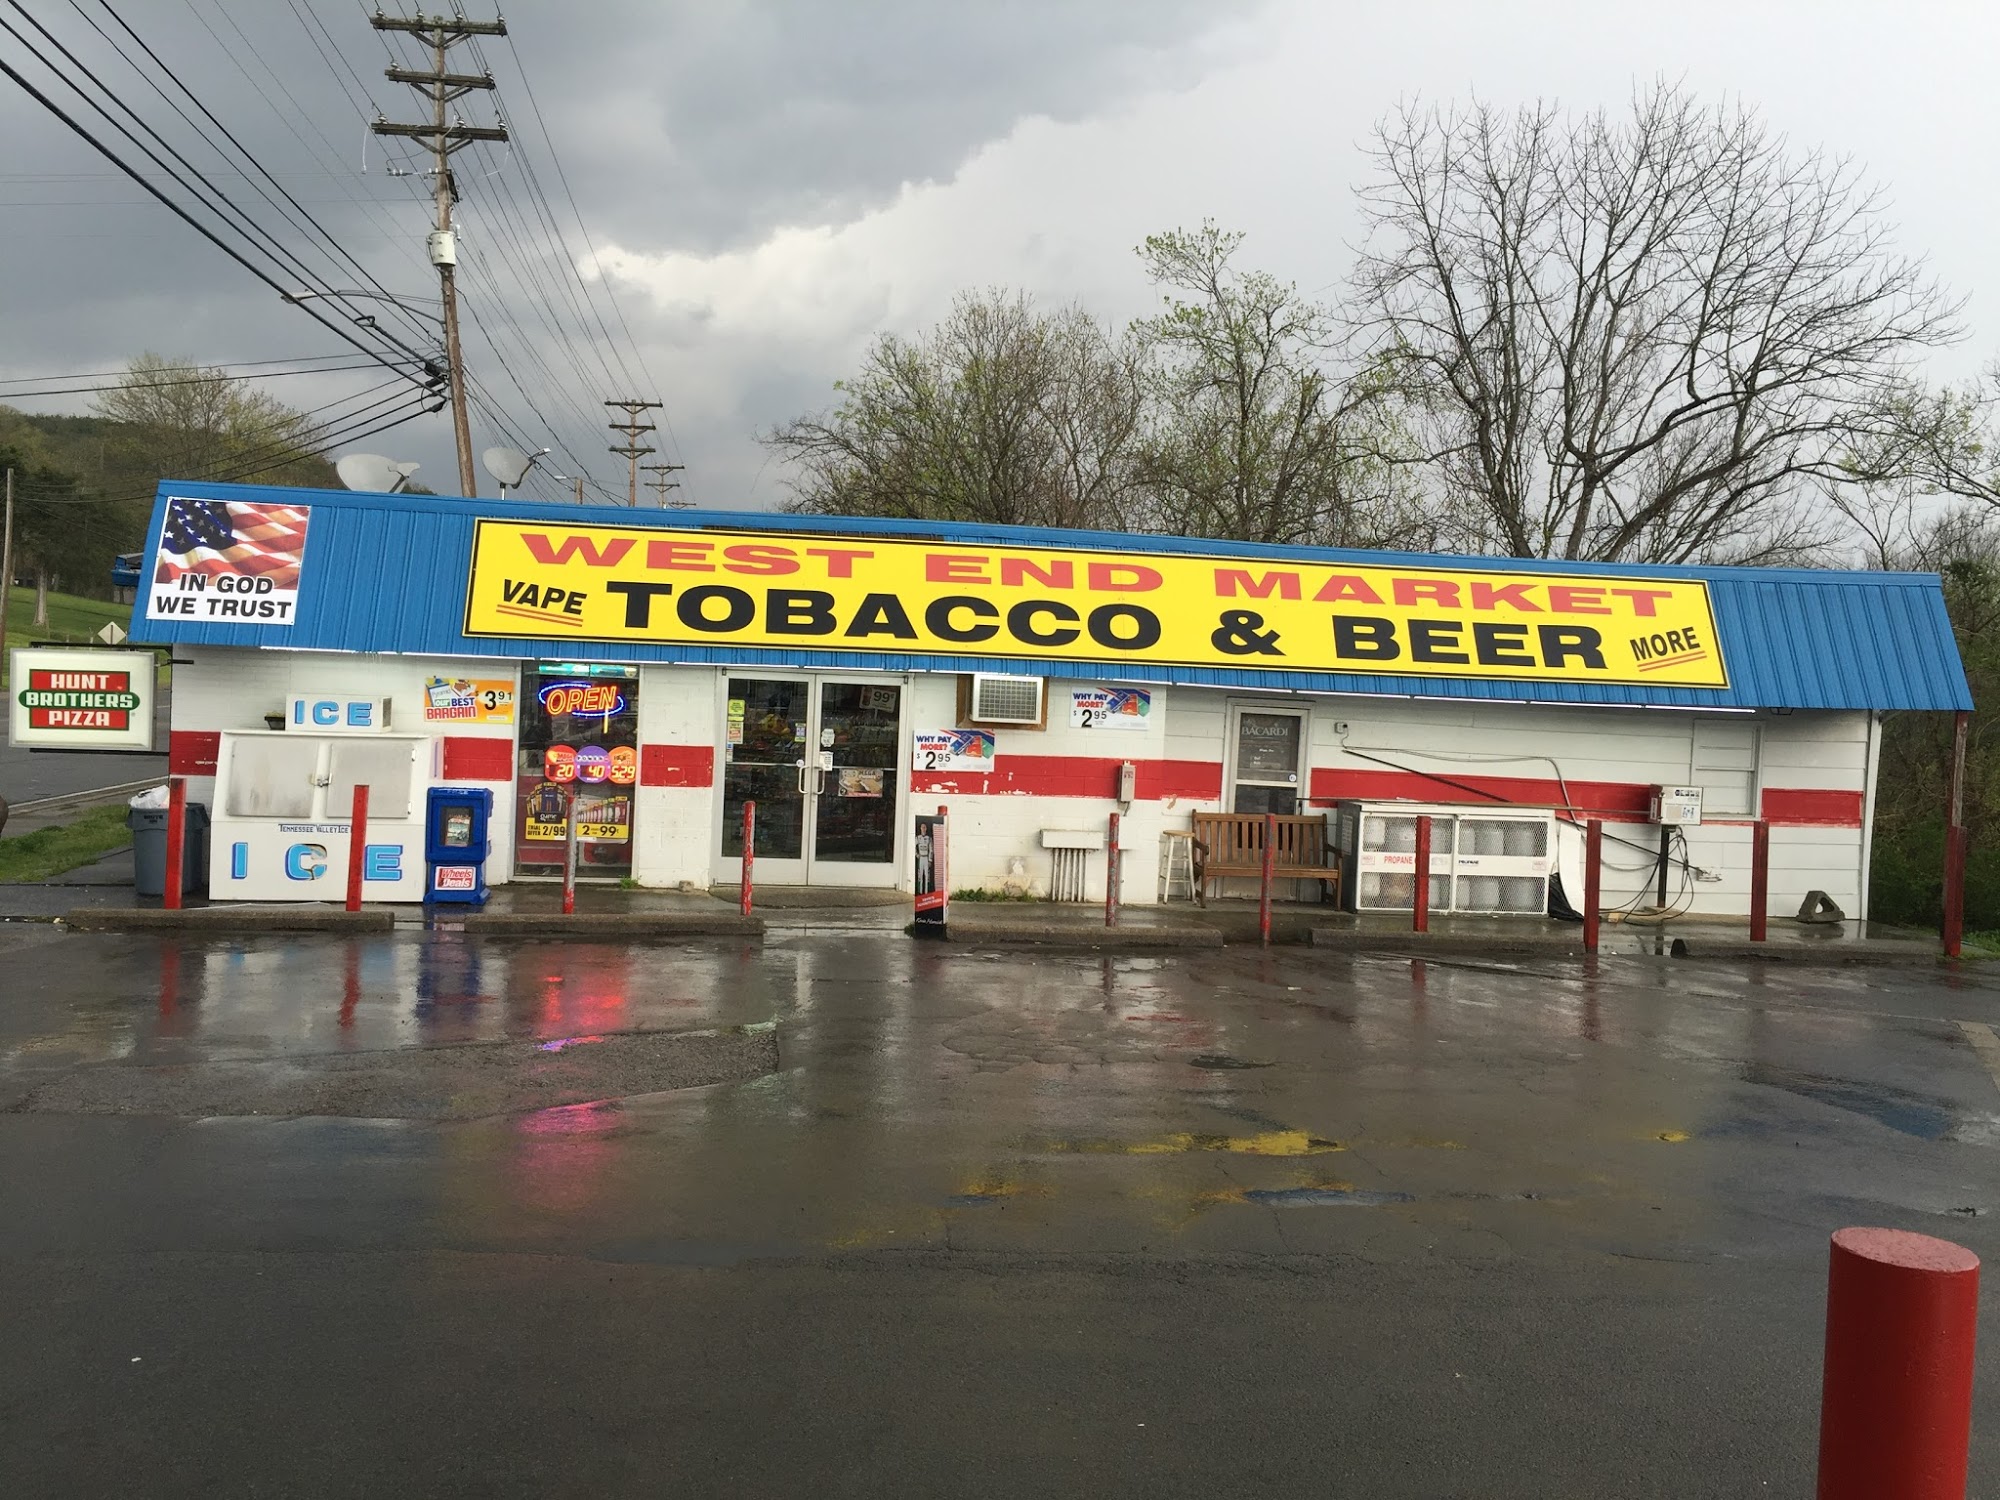 West End Tobacco Outlet and Vape